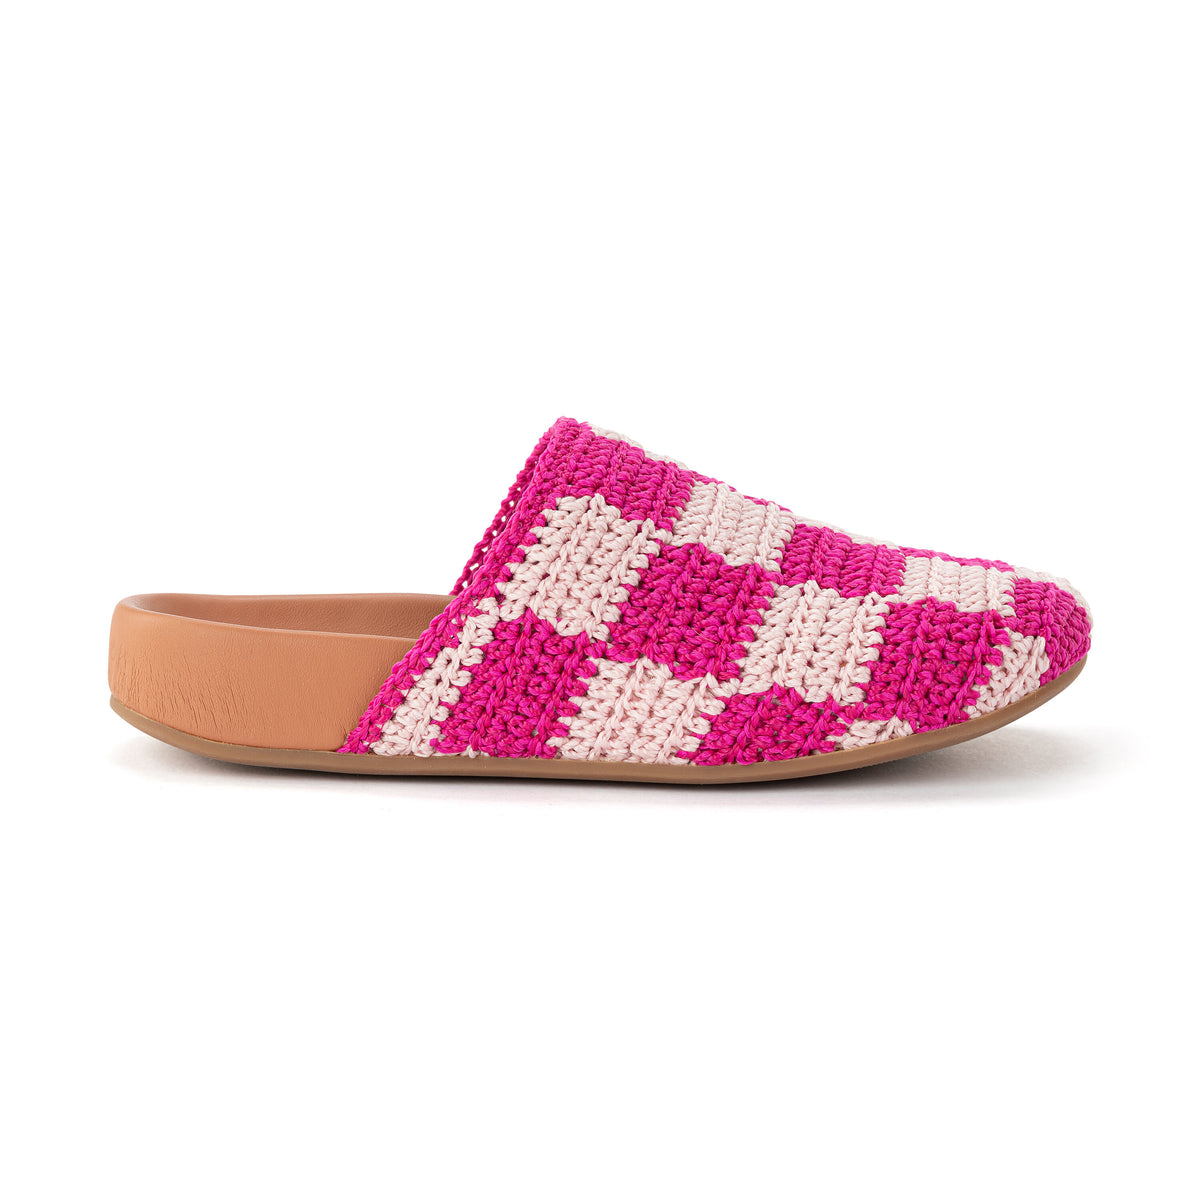 Bolinas Crochet Clogs for Kids - Stylish and Comfortable Footwear – The Sak